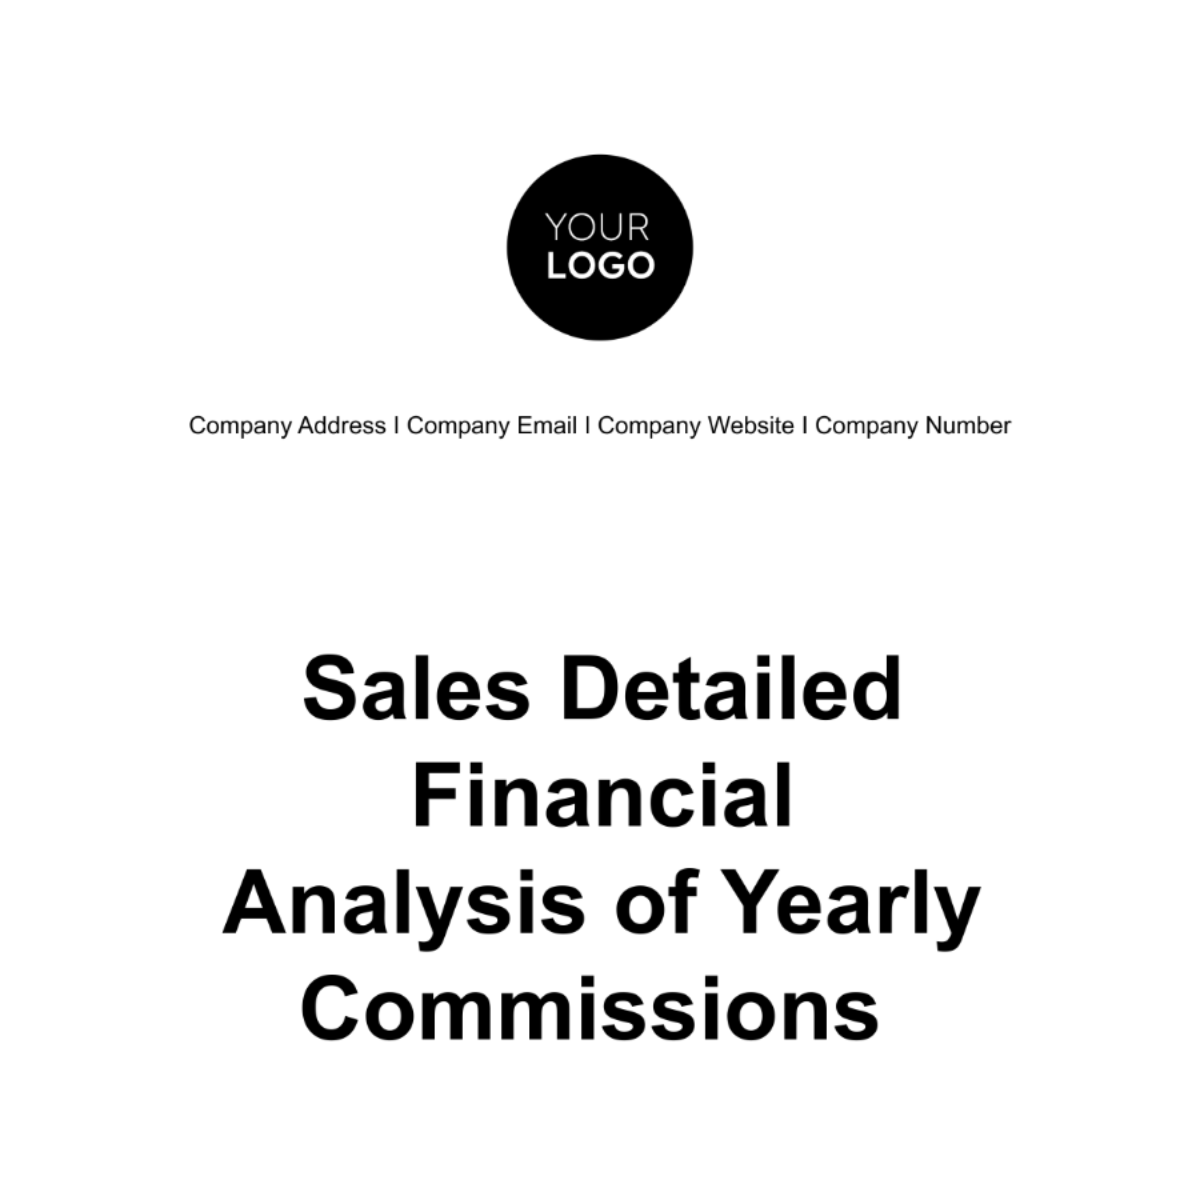 Sales Detailed Financial Analysis of Yearly Commissions Template